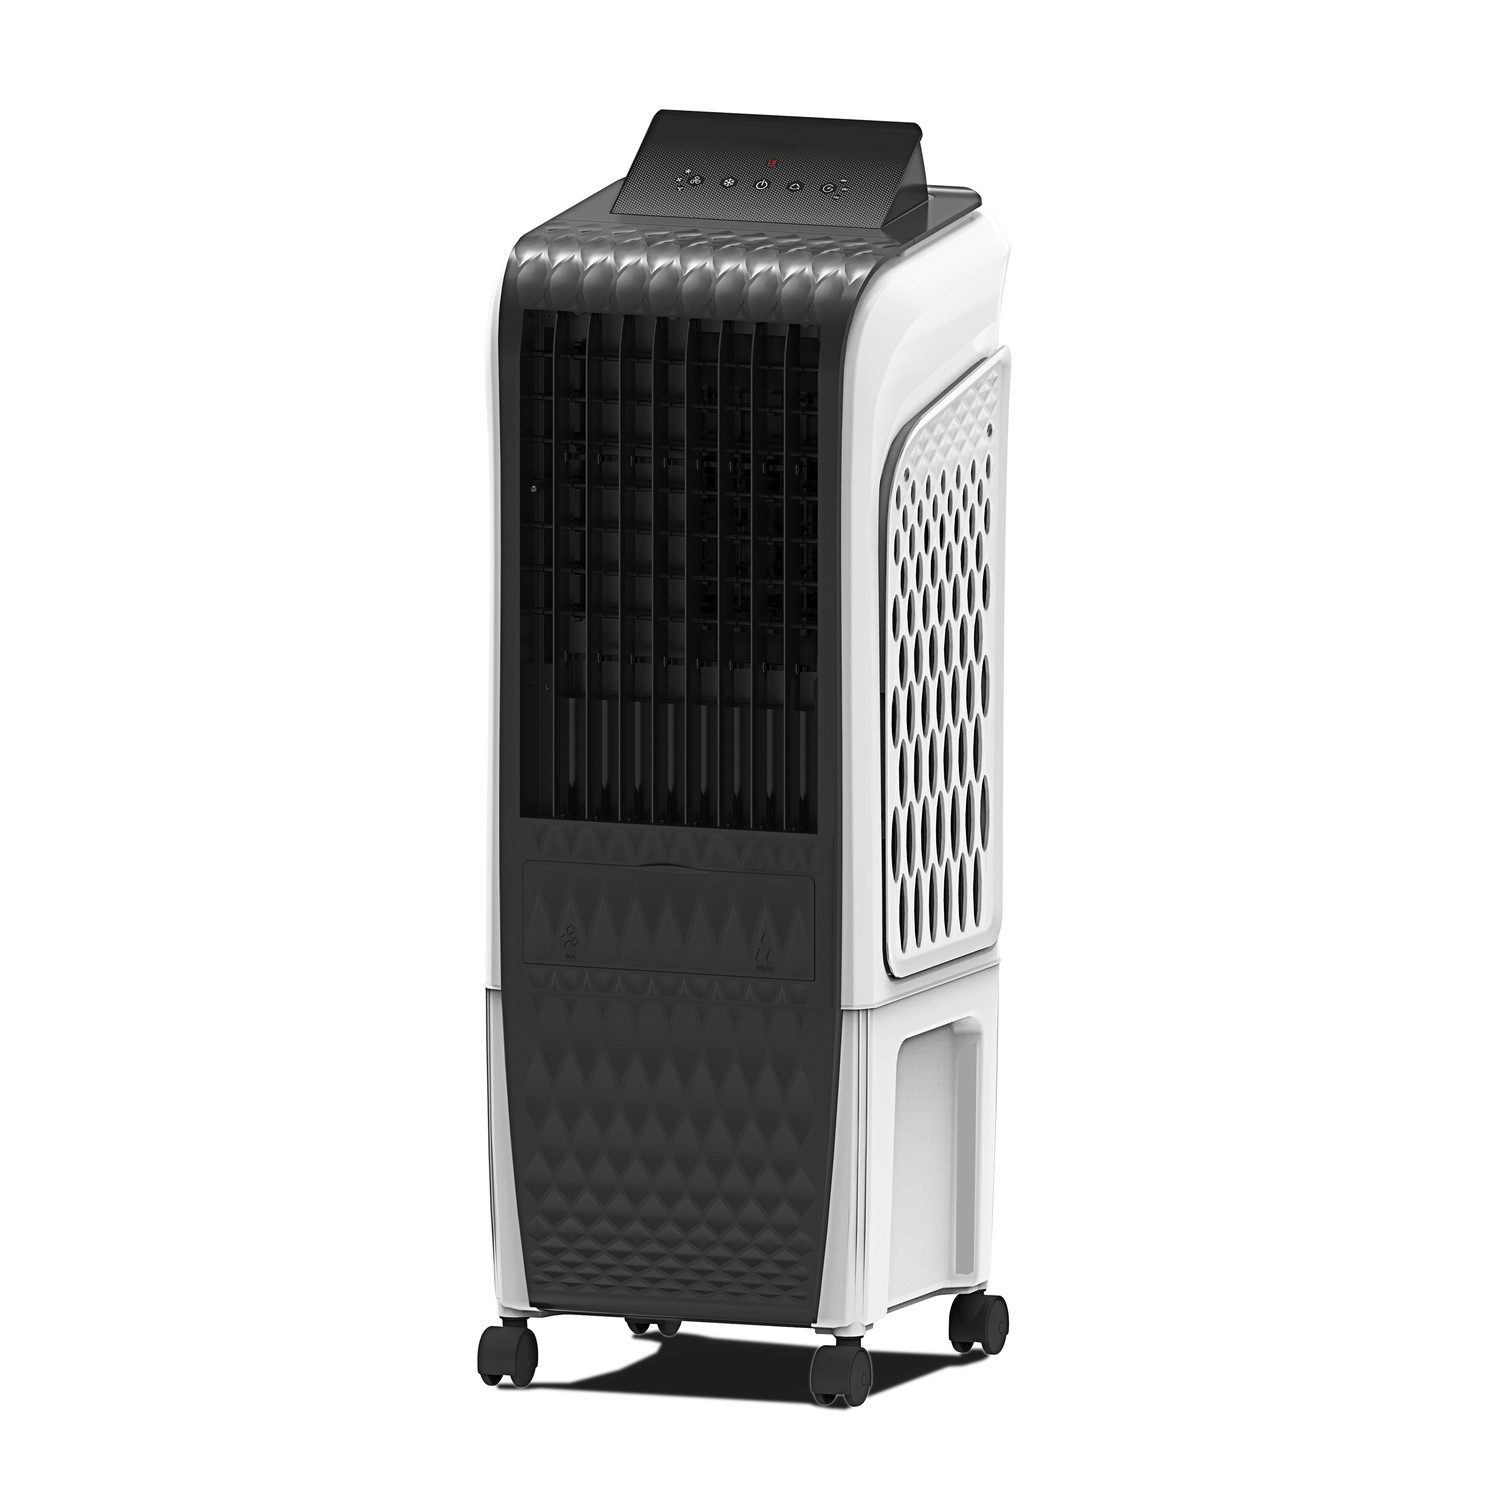 electriQ 16L Portable Evaporative Humidifier Air Cooler and Air Purifier with anti-Bacterial PM2.5 f